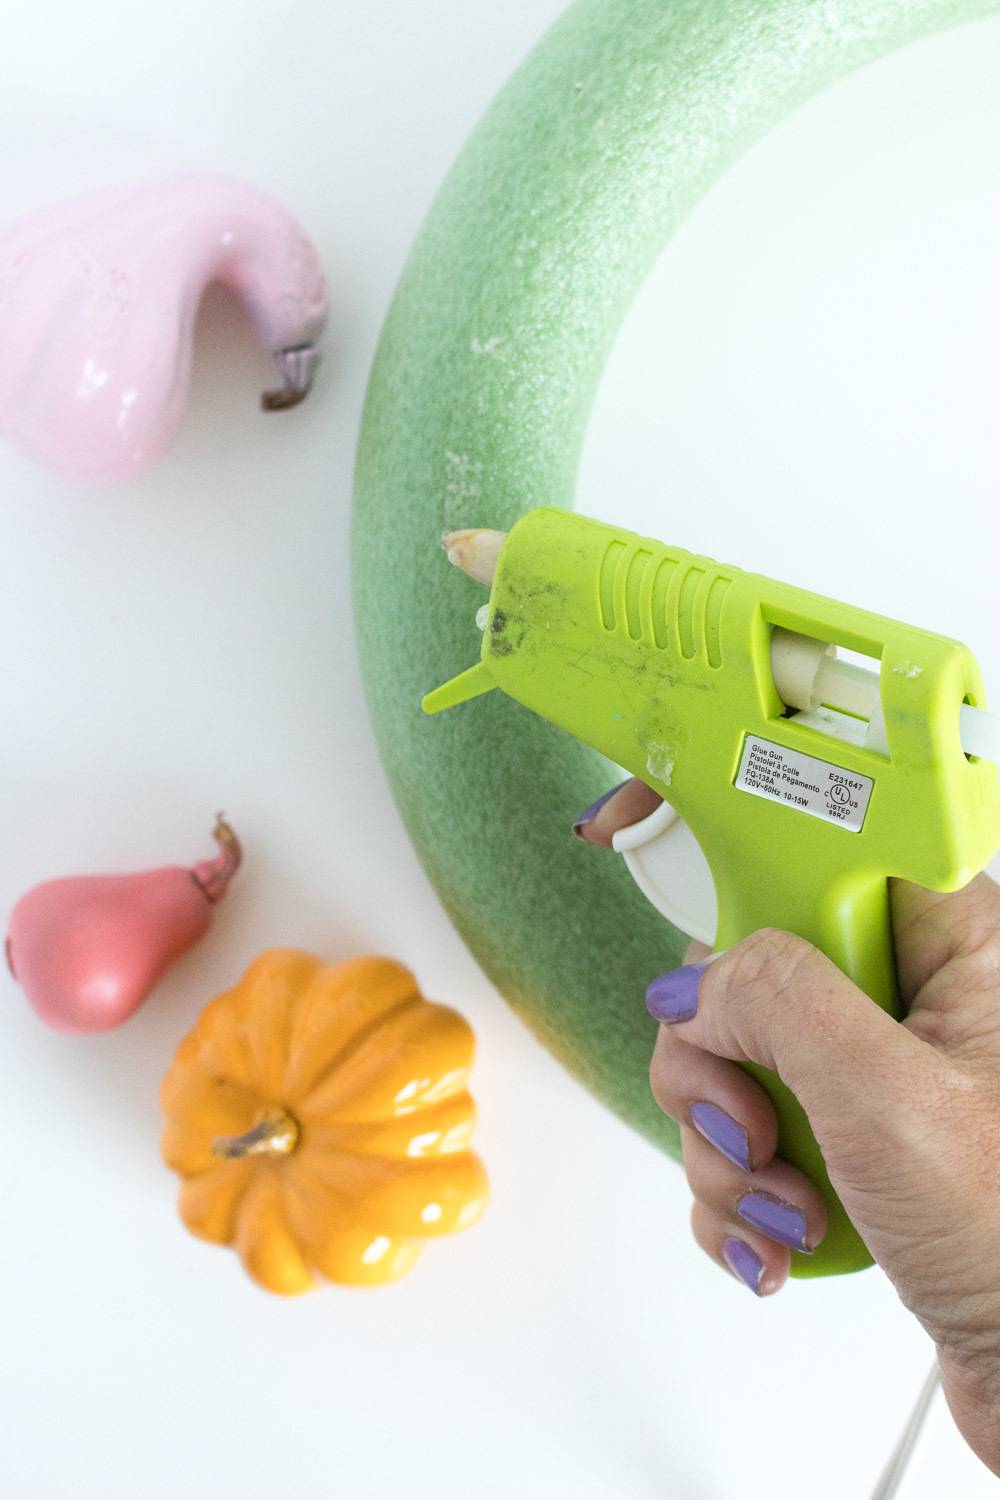 A person is using a hot glue gun to put glue on a green foam ring and there is a small pumpkin and other things near it.